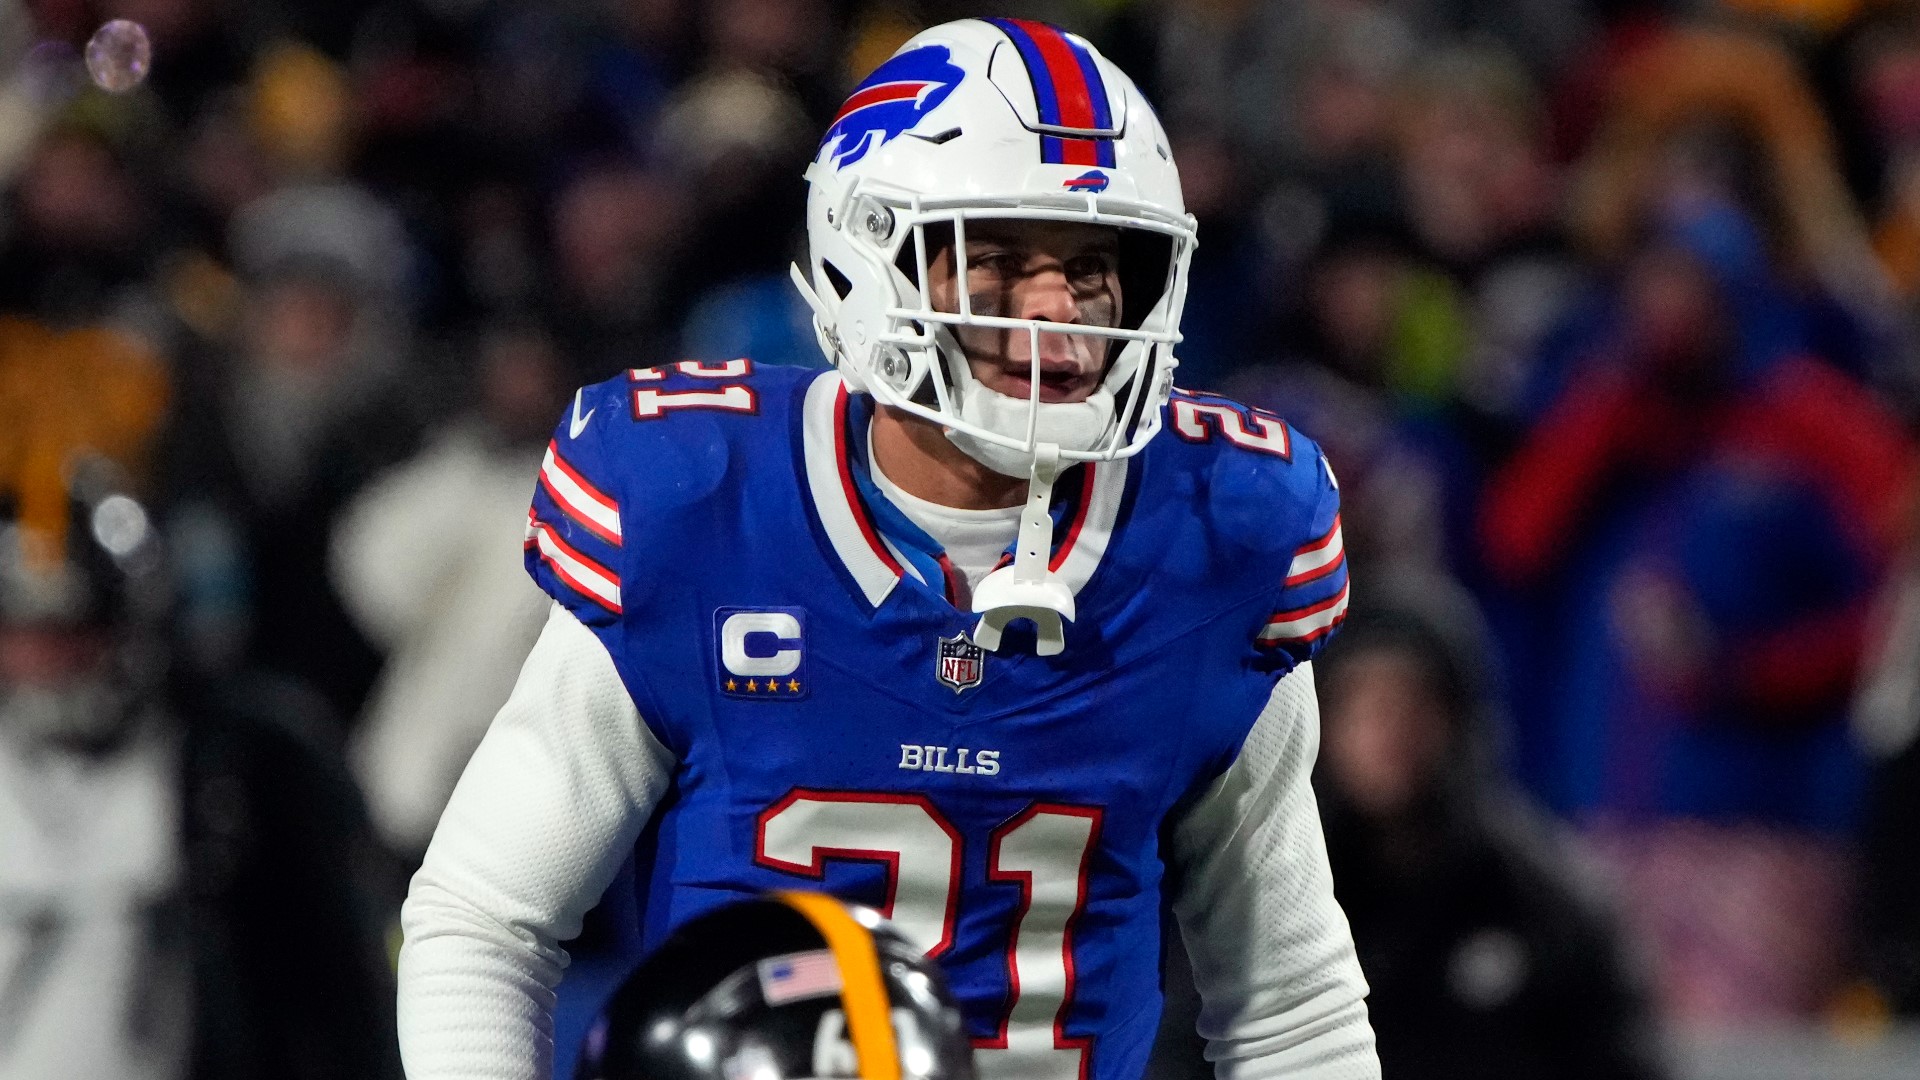 Channel 2 Sports Reporter Jonathan Acosta and WGRZ Bills/NFL Insider Vic Carucci discuss cap-clearing moves as the Bills cut Jordan Poyer, Mitch Morse, and others.